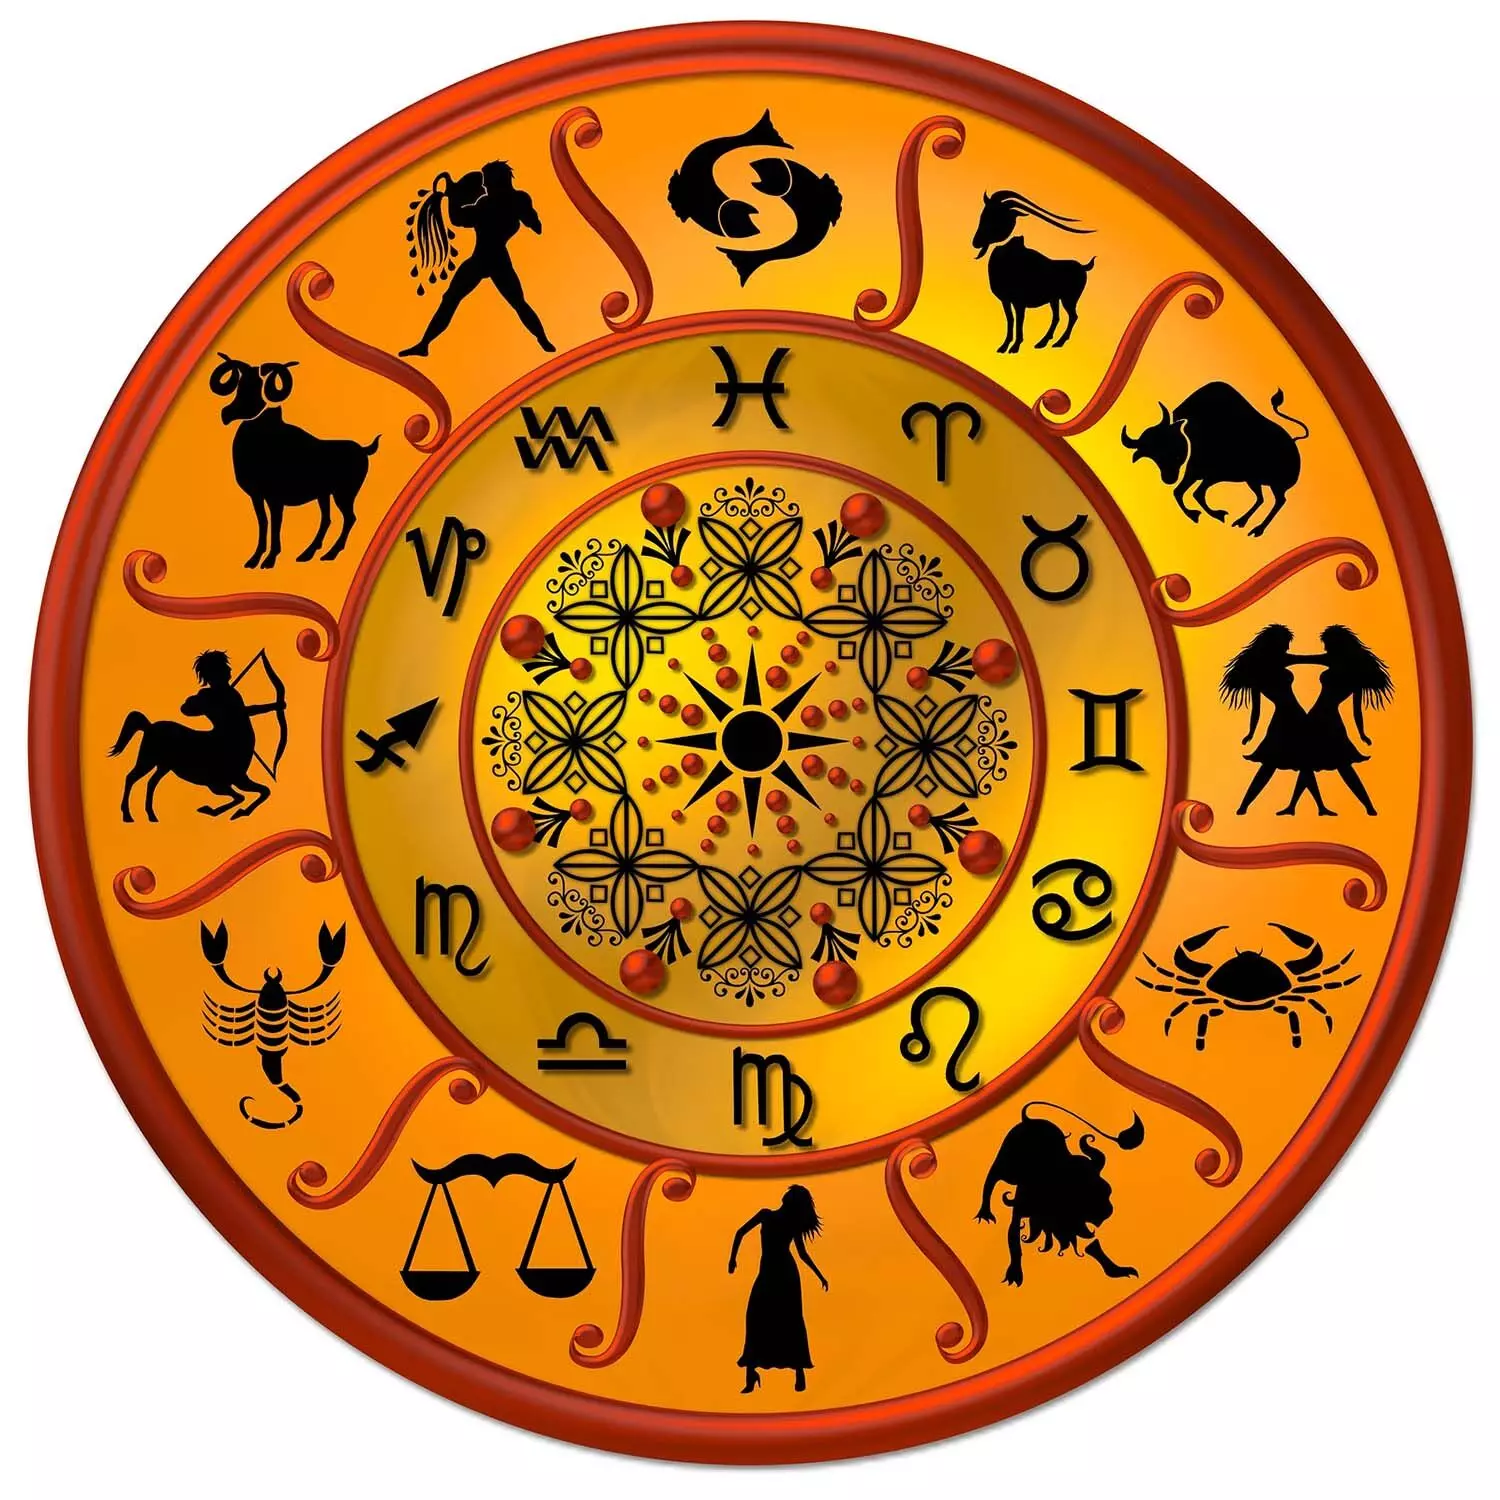 03 August  – Know your todays horoscope